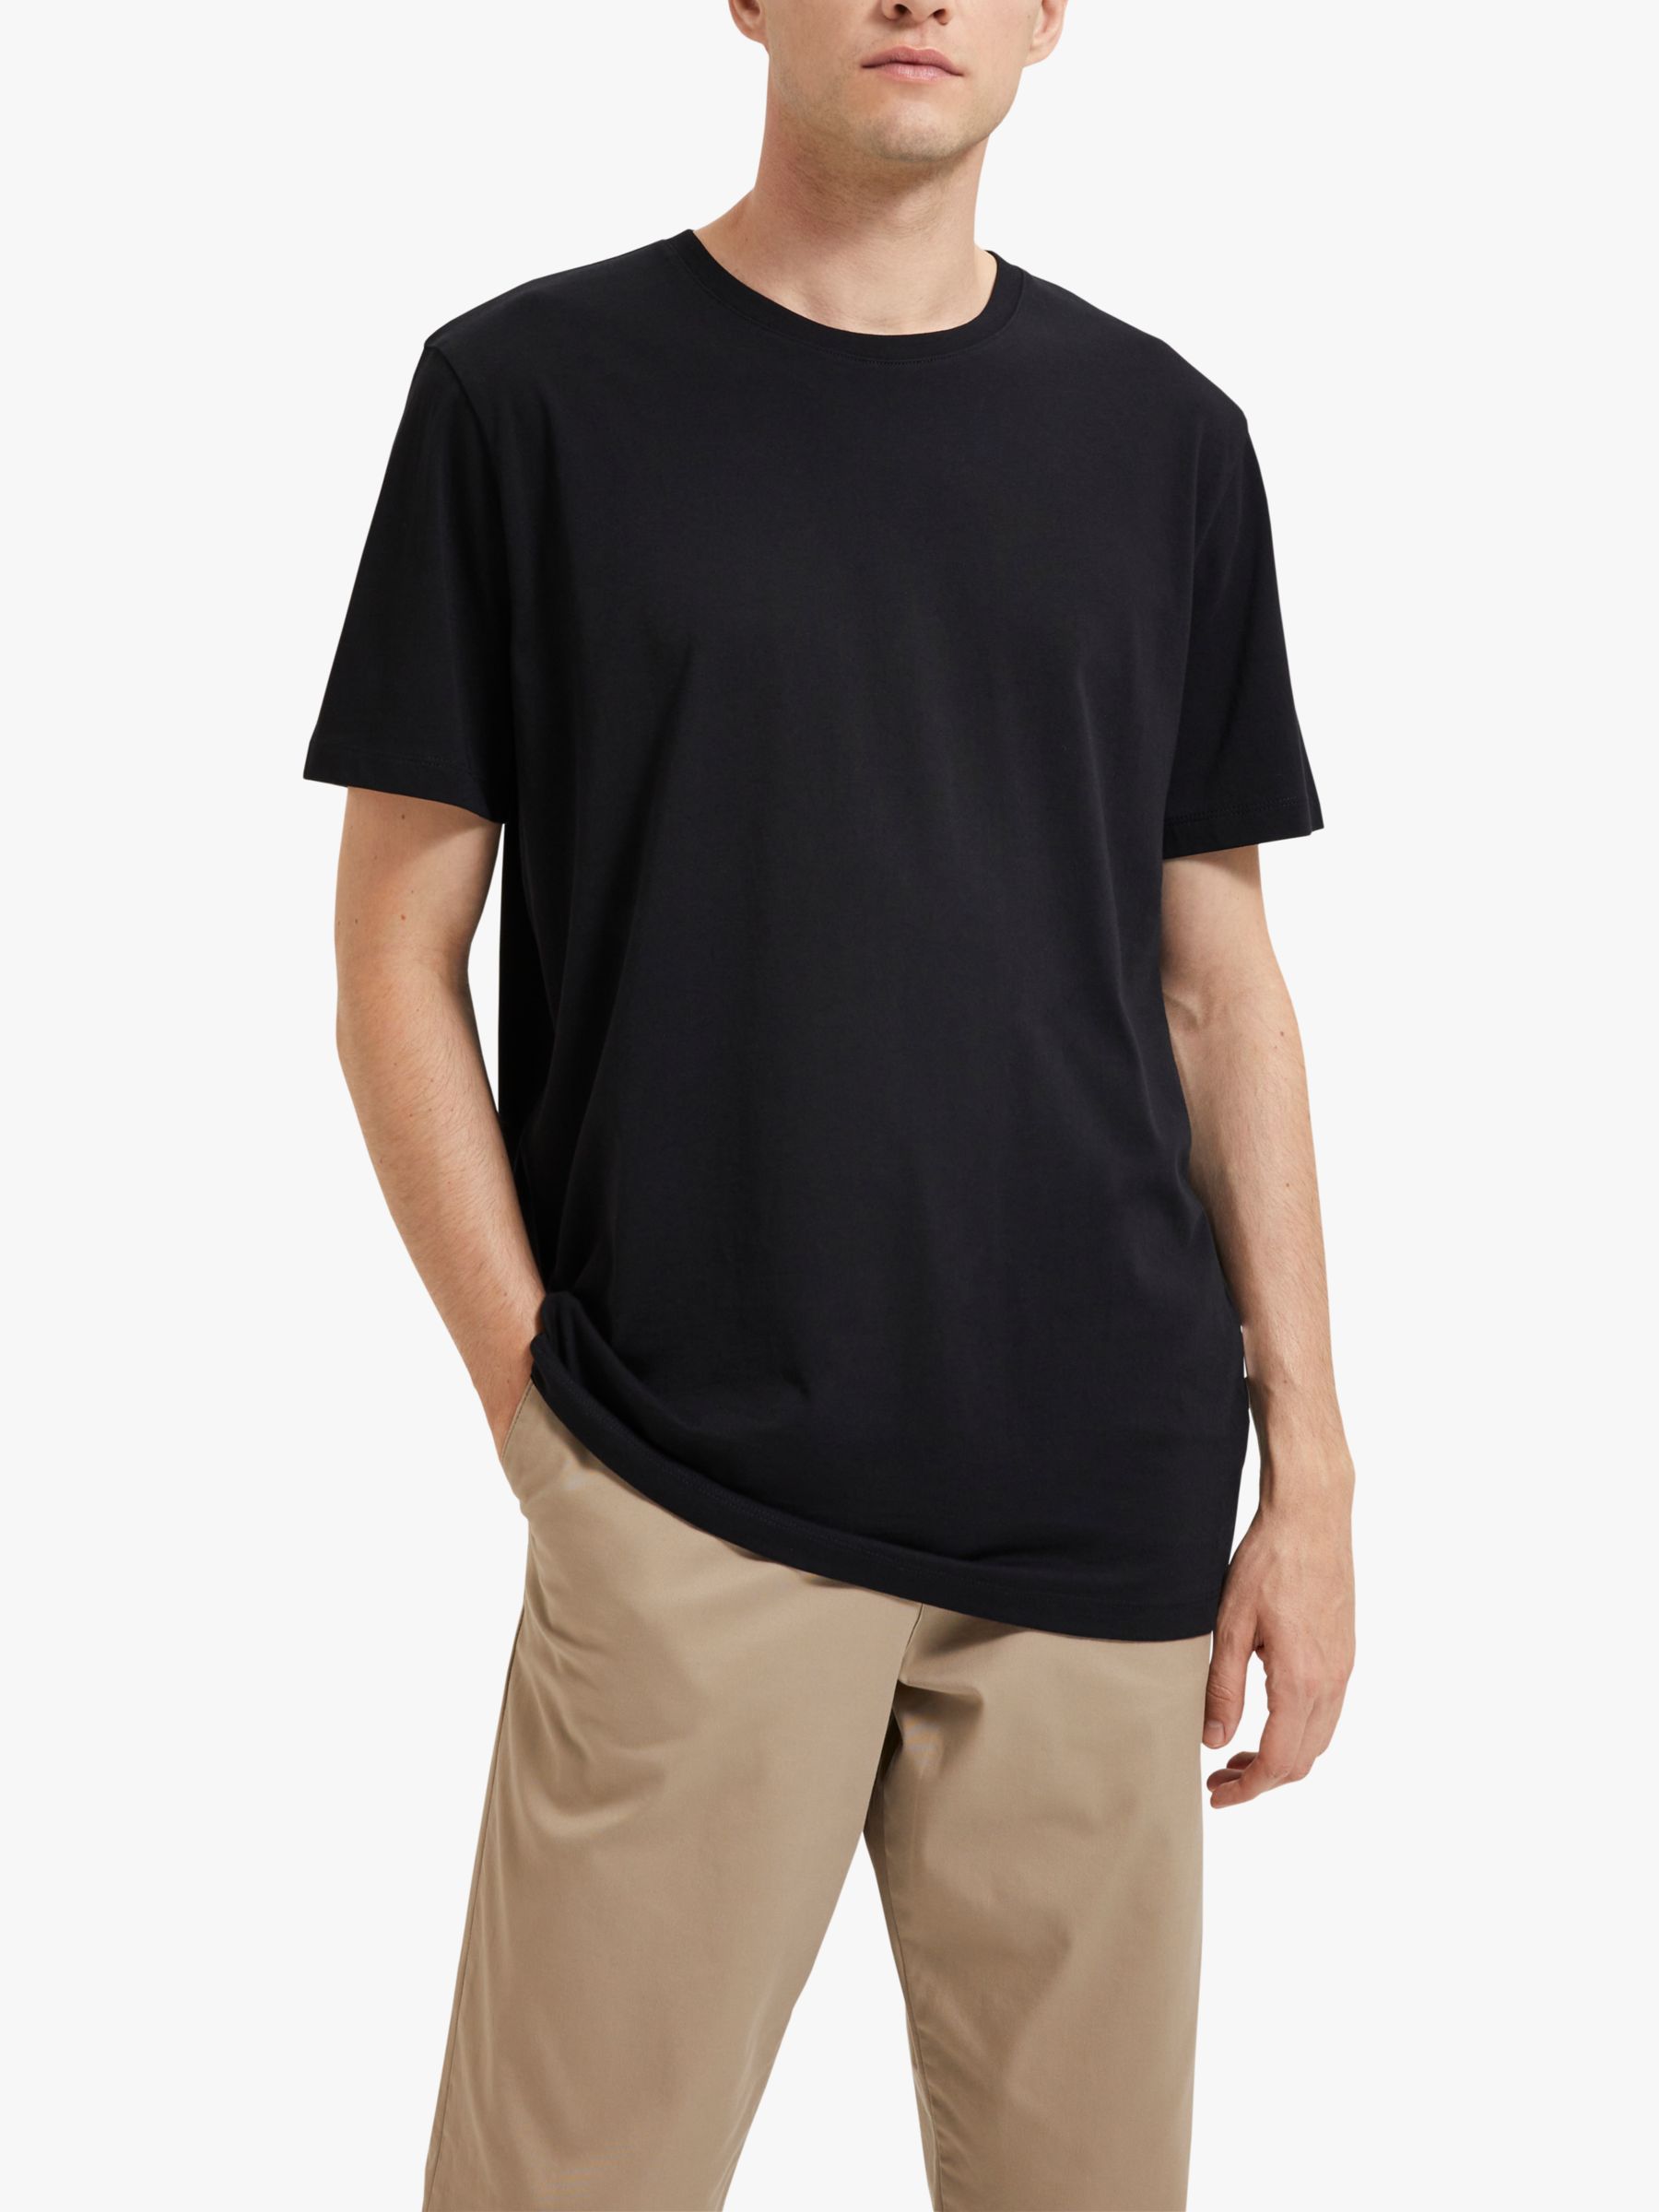 SELECTED HOMME Organic Cotton T-Shirt, Black, S